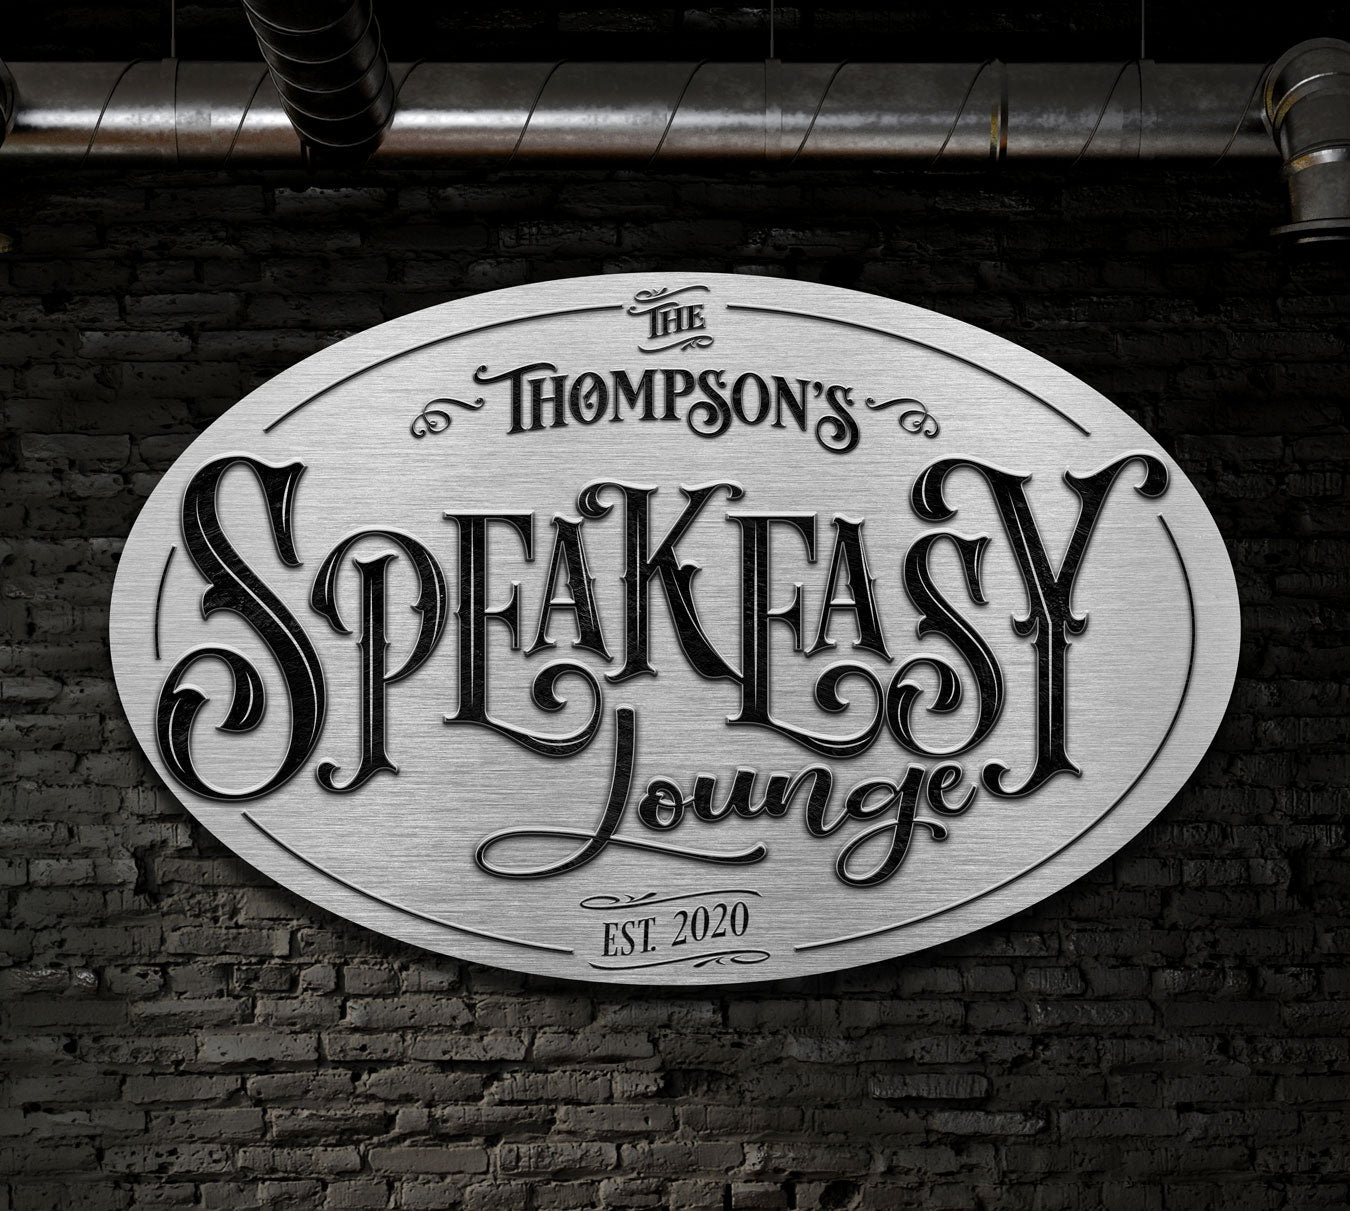 speakeasy sign in on silver background with black letters that say (name) speakeasy Lounge